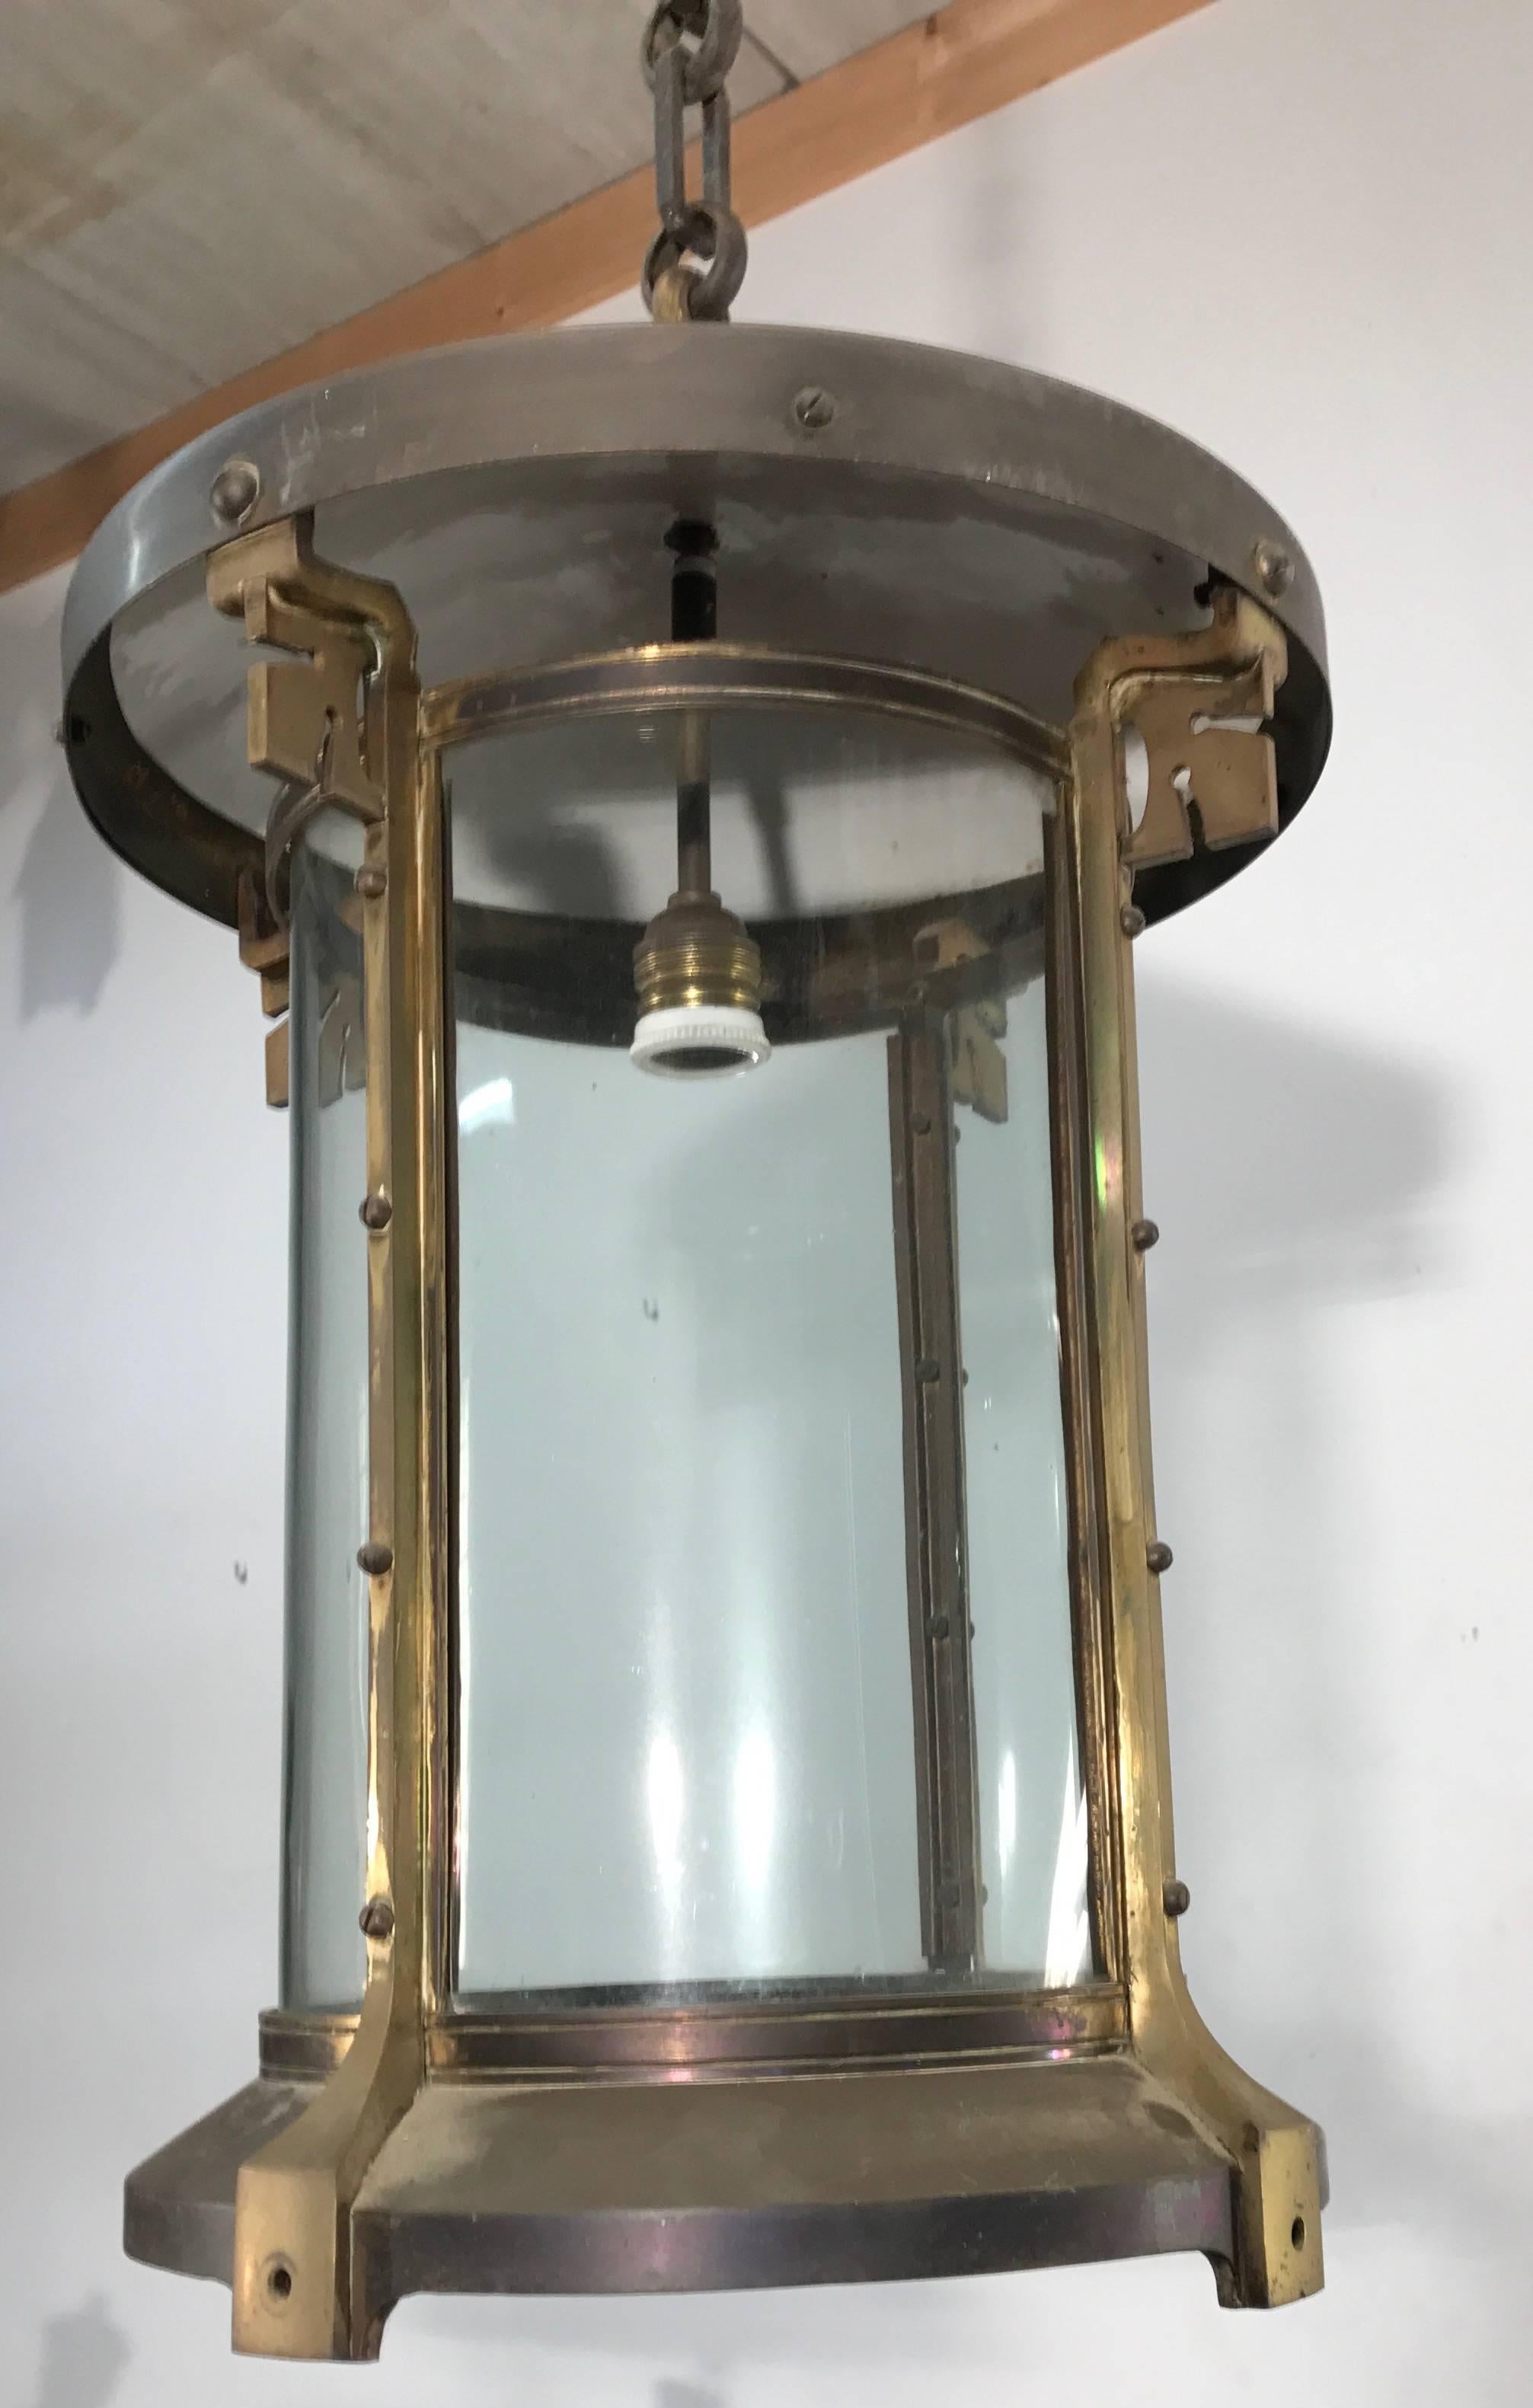 Large and stylish Jugendstil pendant with original, curved glass panels. 

This stunning design is all handcrafted and in good condition. If you love the Jugendstil / Arts and Crafts period and you have room for this impressive and very stylish work